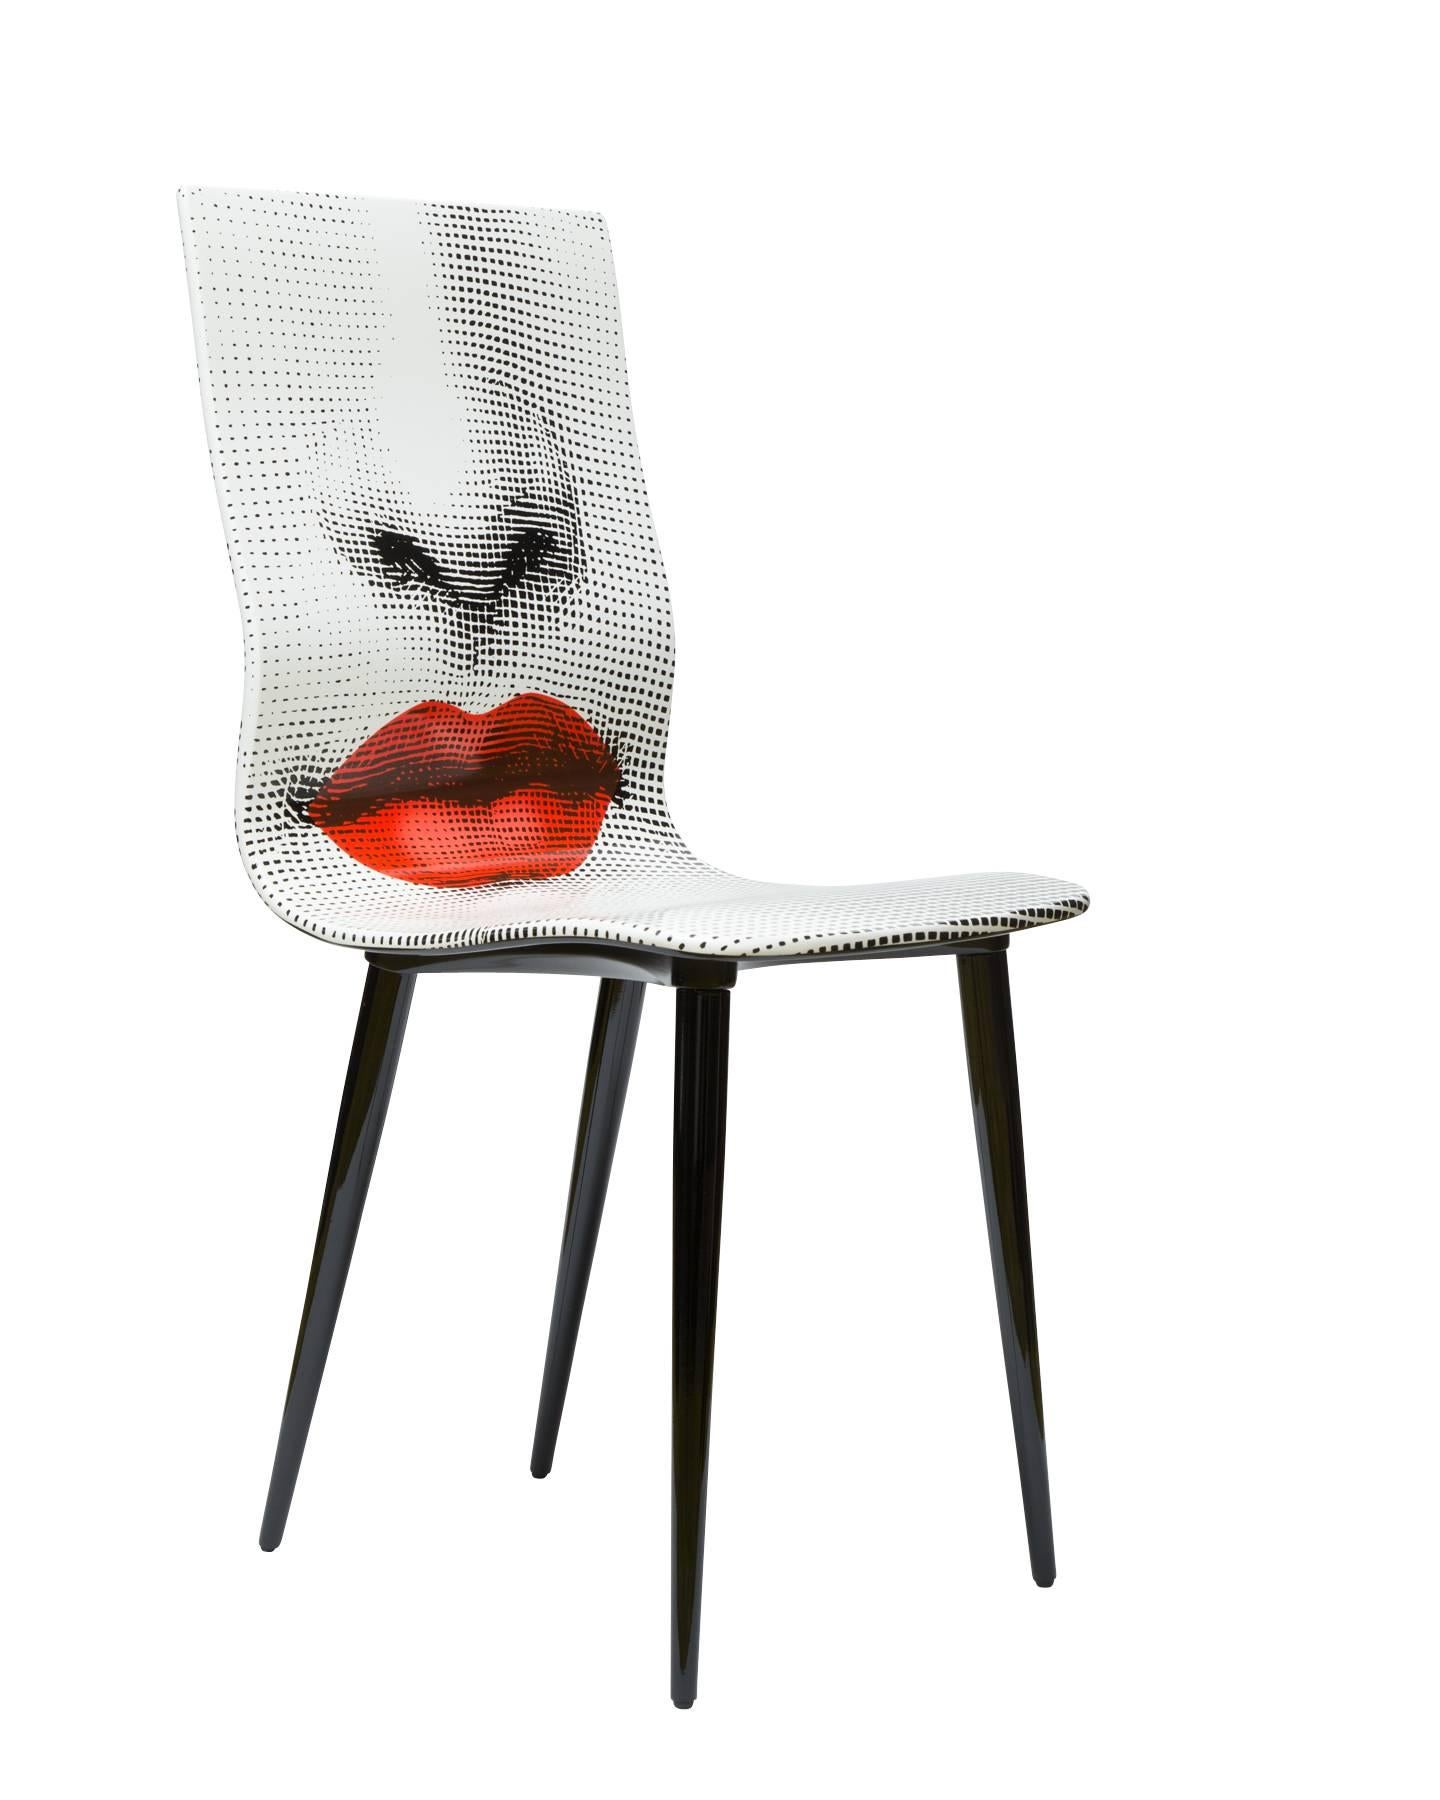 This chair has a lithographically applied graphic which is hand-finished and covered with a smooth lacquer.

13 of 60 made in 2016.

The Italian artist and illustrator Piero Fornasetti was one of the wittiest and most imaginative design talents of